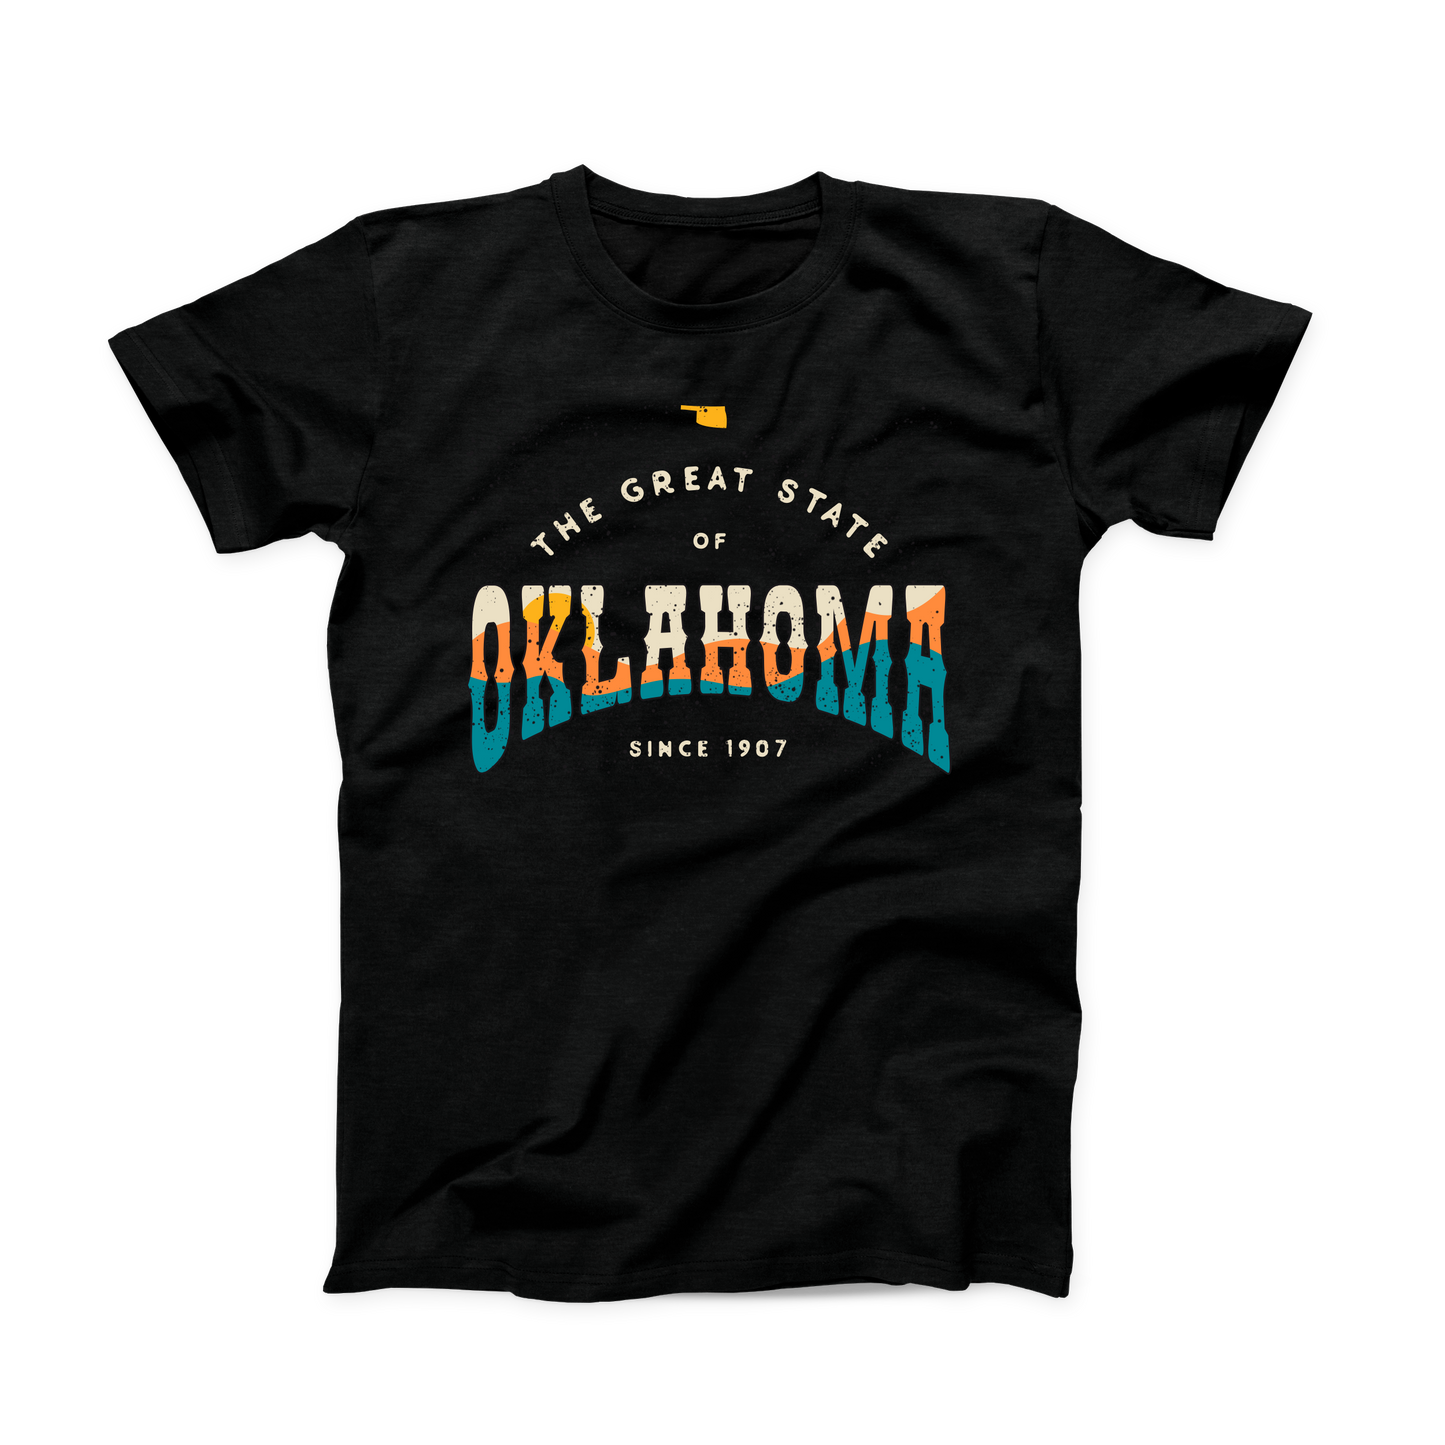 Black Oklahoma t-shirt. Small Oklahoma state shape at the top in yellow gold. "The Great State of Oklahoma since 1907" listed under the state. "Oklahoma" is the largest font on the shirt with a sunset over hills shown within the word in cream, yellow, orange, and teal. 